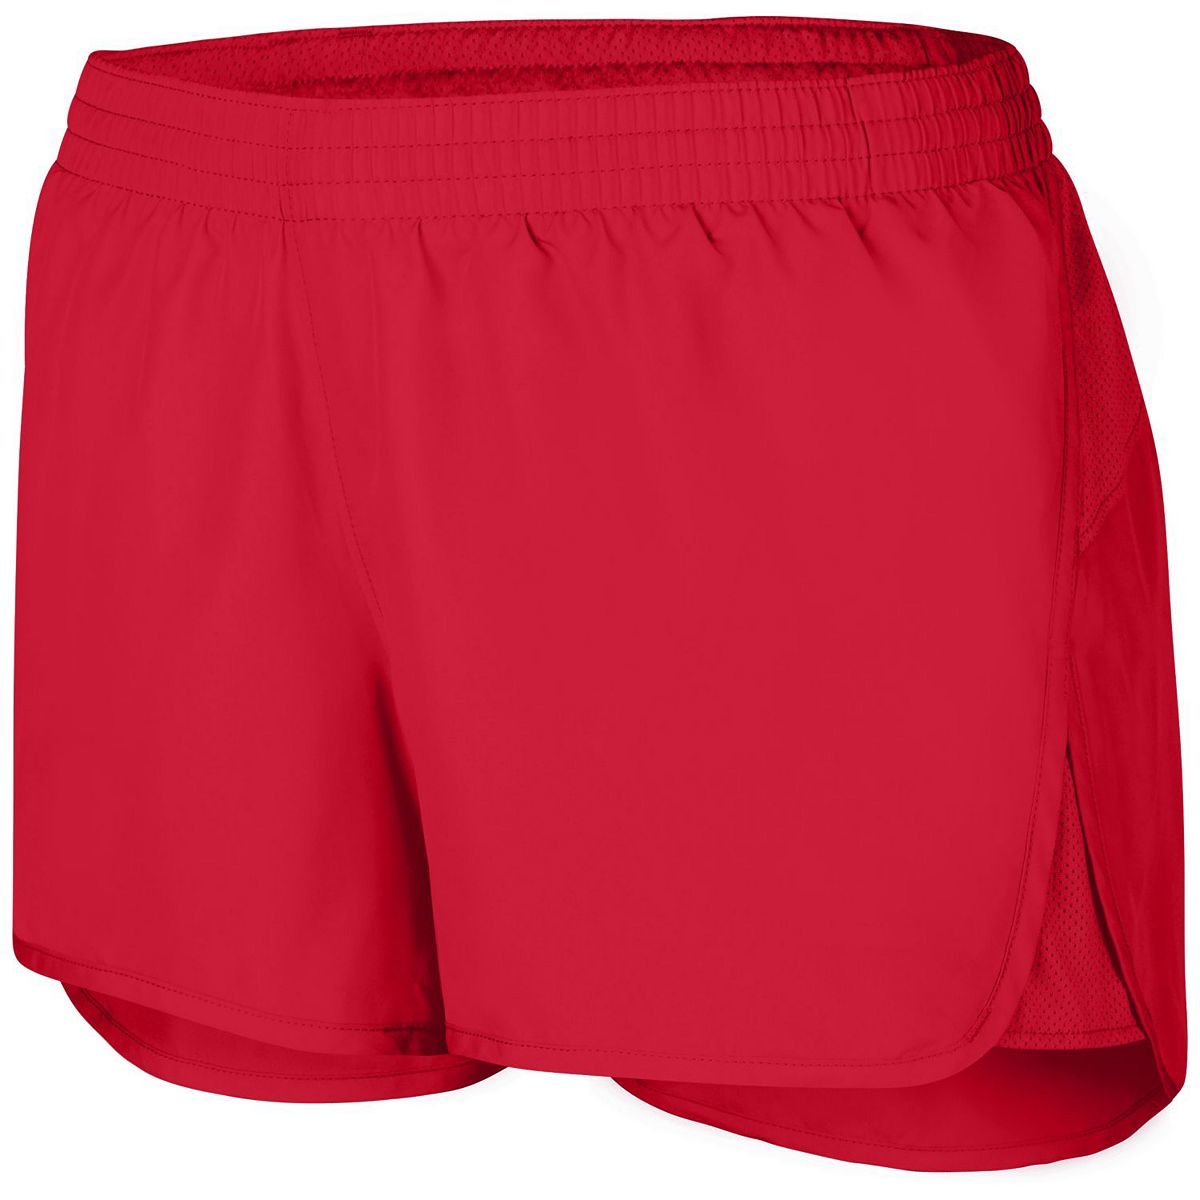 Augusta Sportswear Girls Wayfarer Shorts in Red  -Part of the Girls, Augusta-Products, Girls-Shorts product lines at KanaleyCreations.com